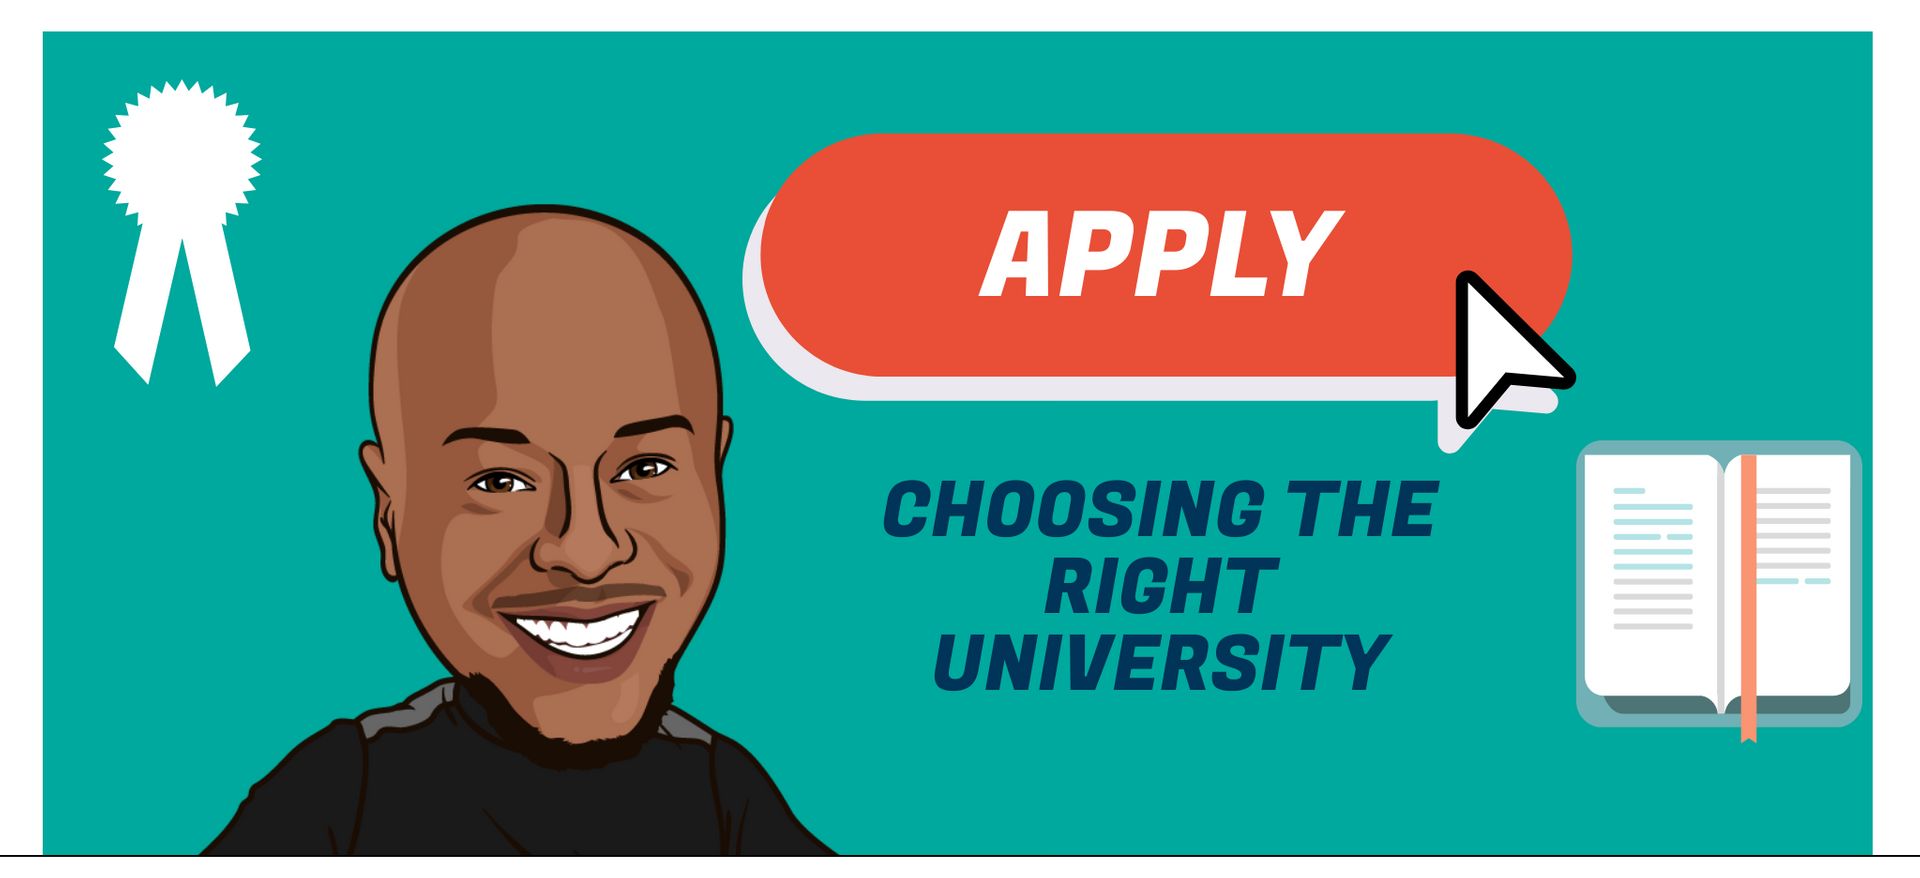 A cartoon image about choosing the right university.